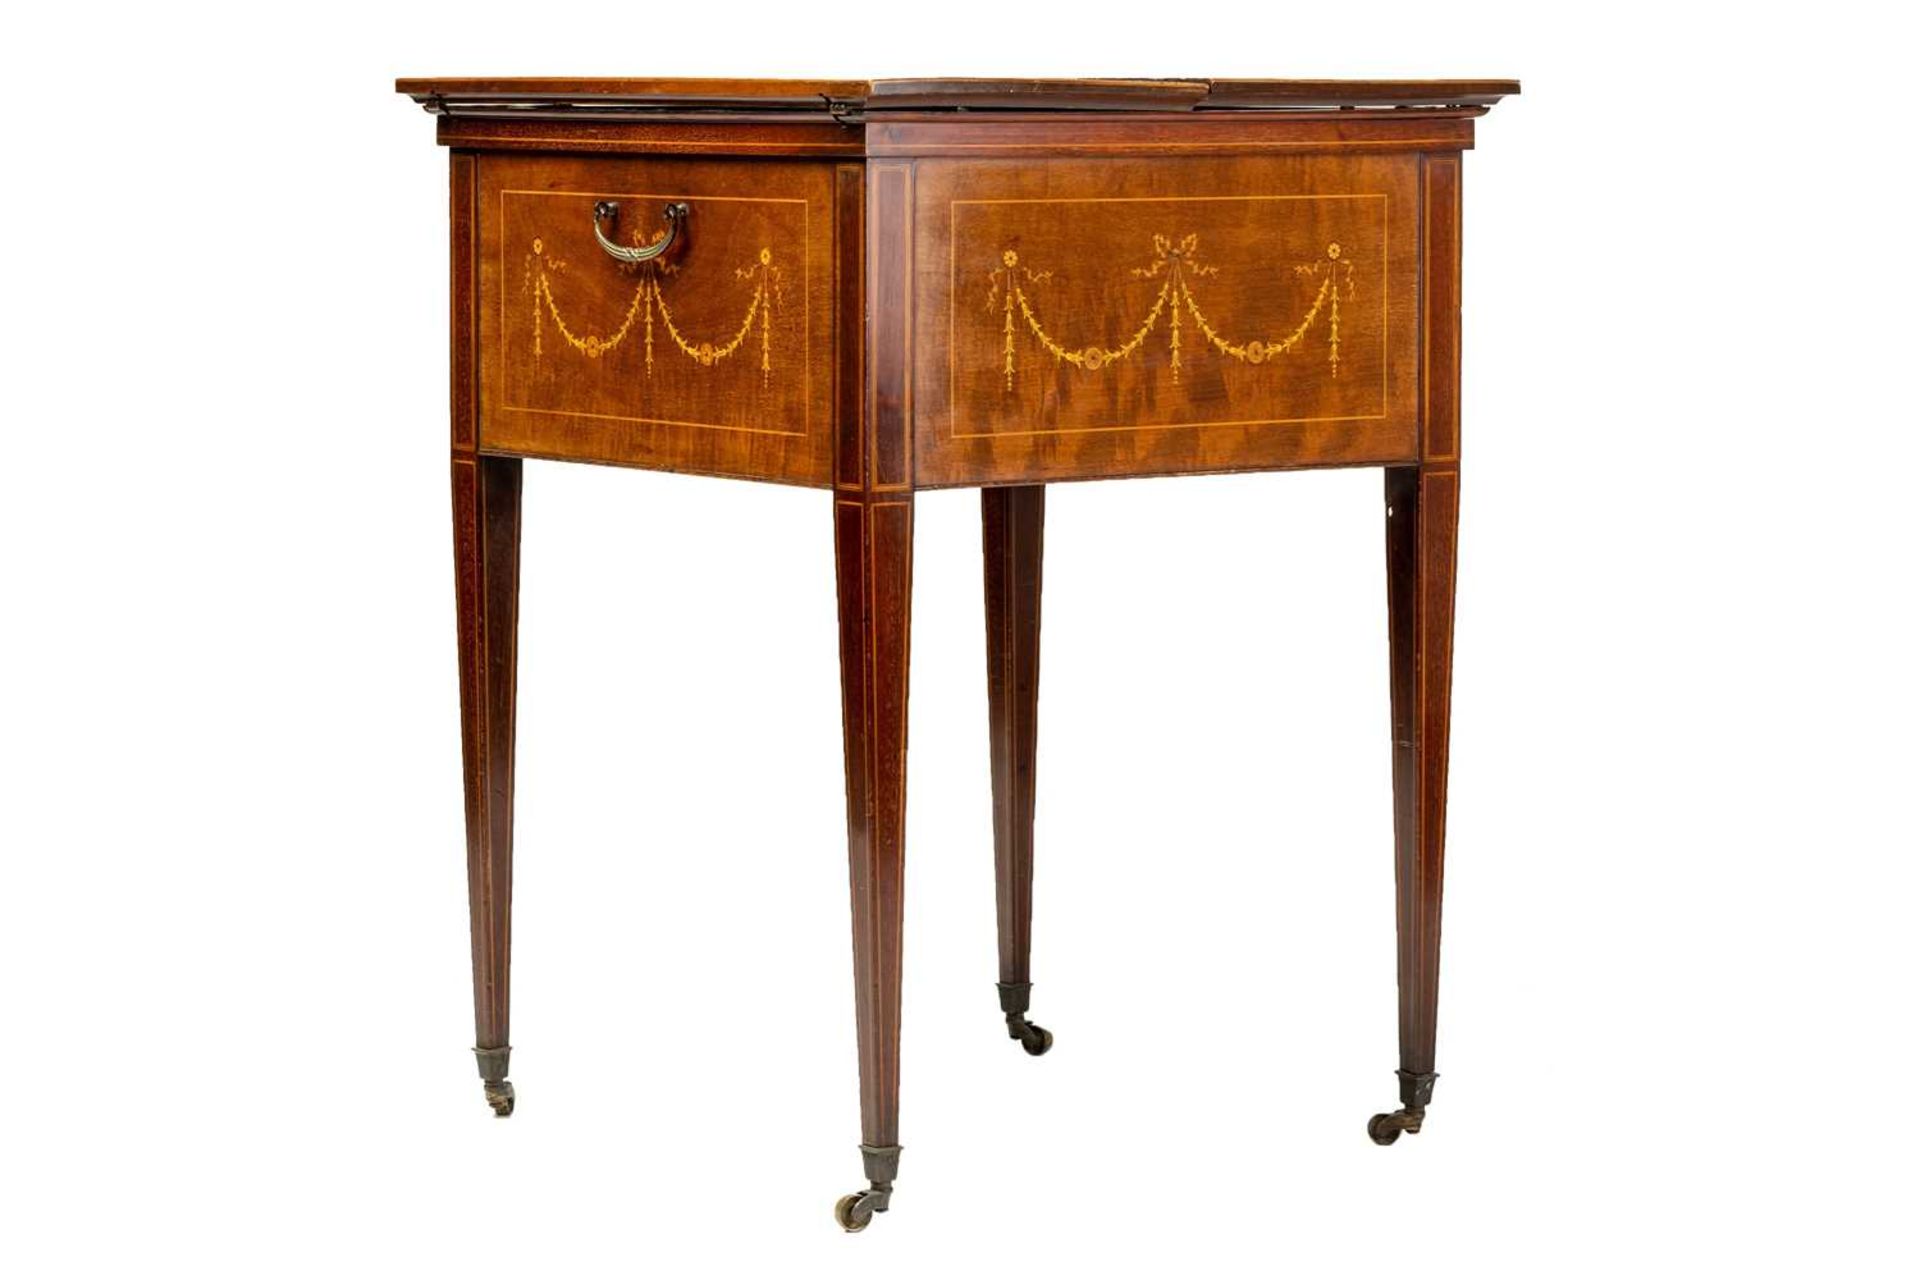 An Edwardian Maple & Co of Tottenham Court Rd, Neo-Classical marquetry inlaid mahogany drinks table, - Image 11 of 19